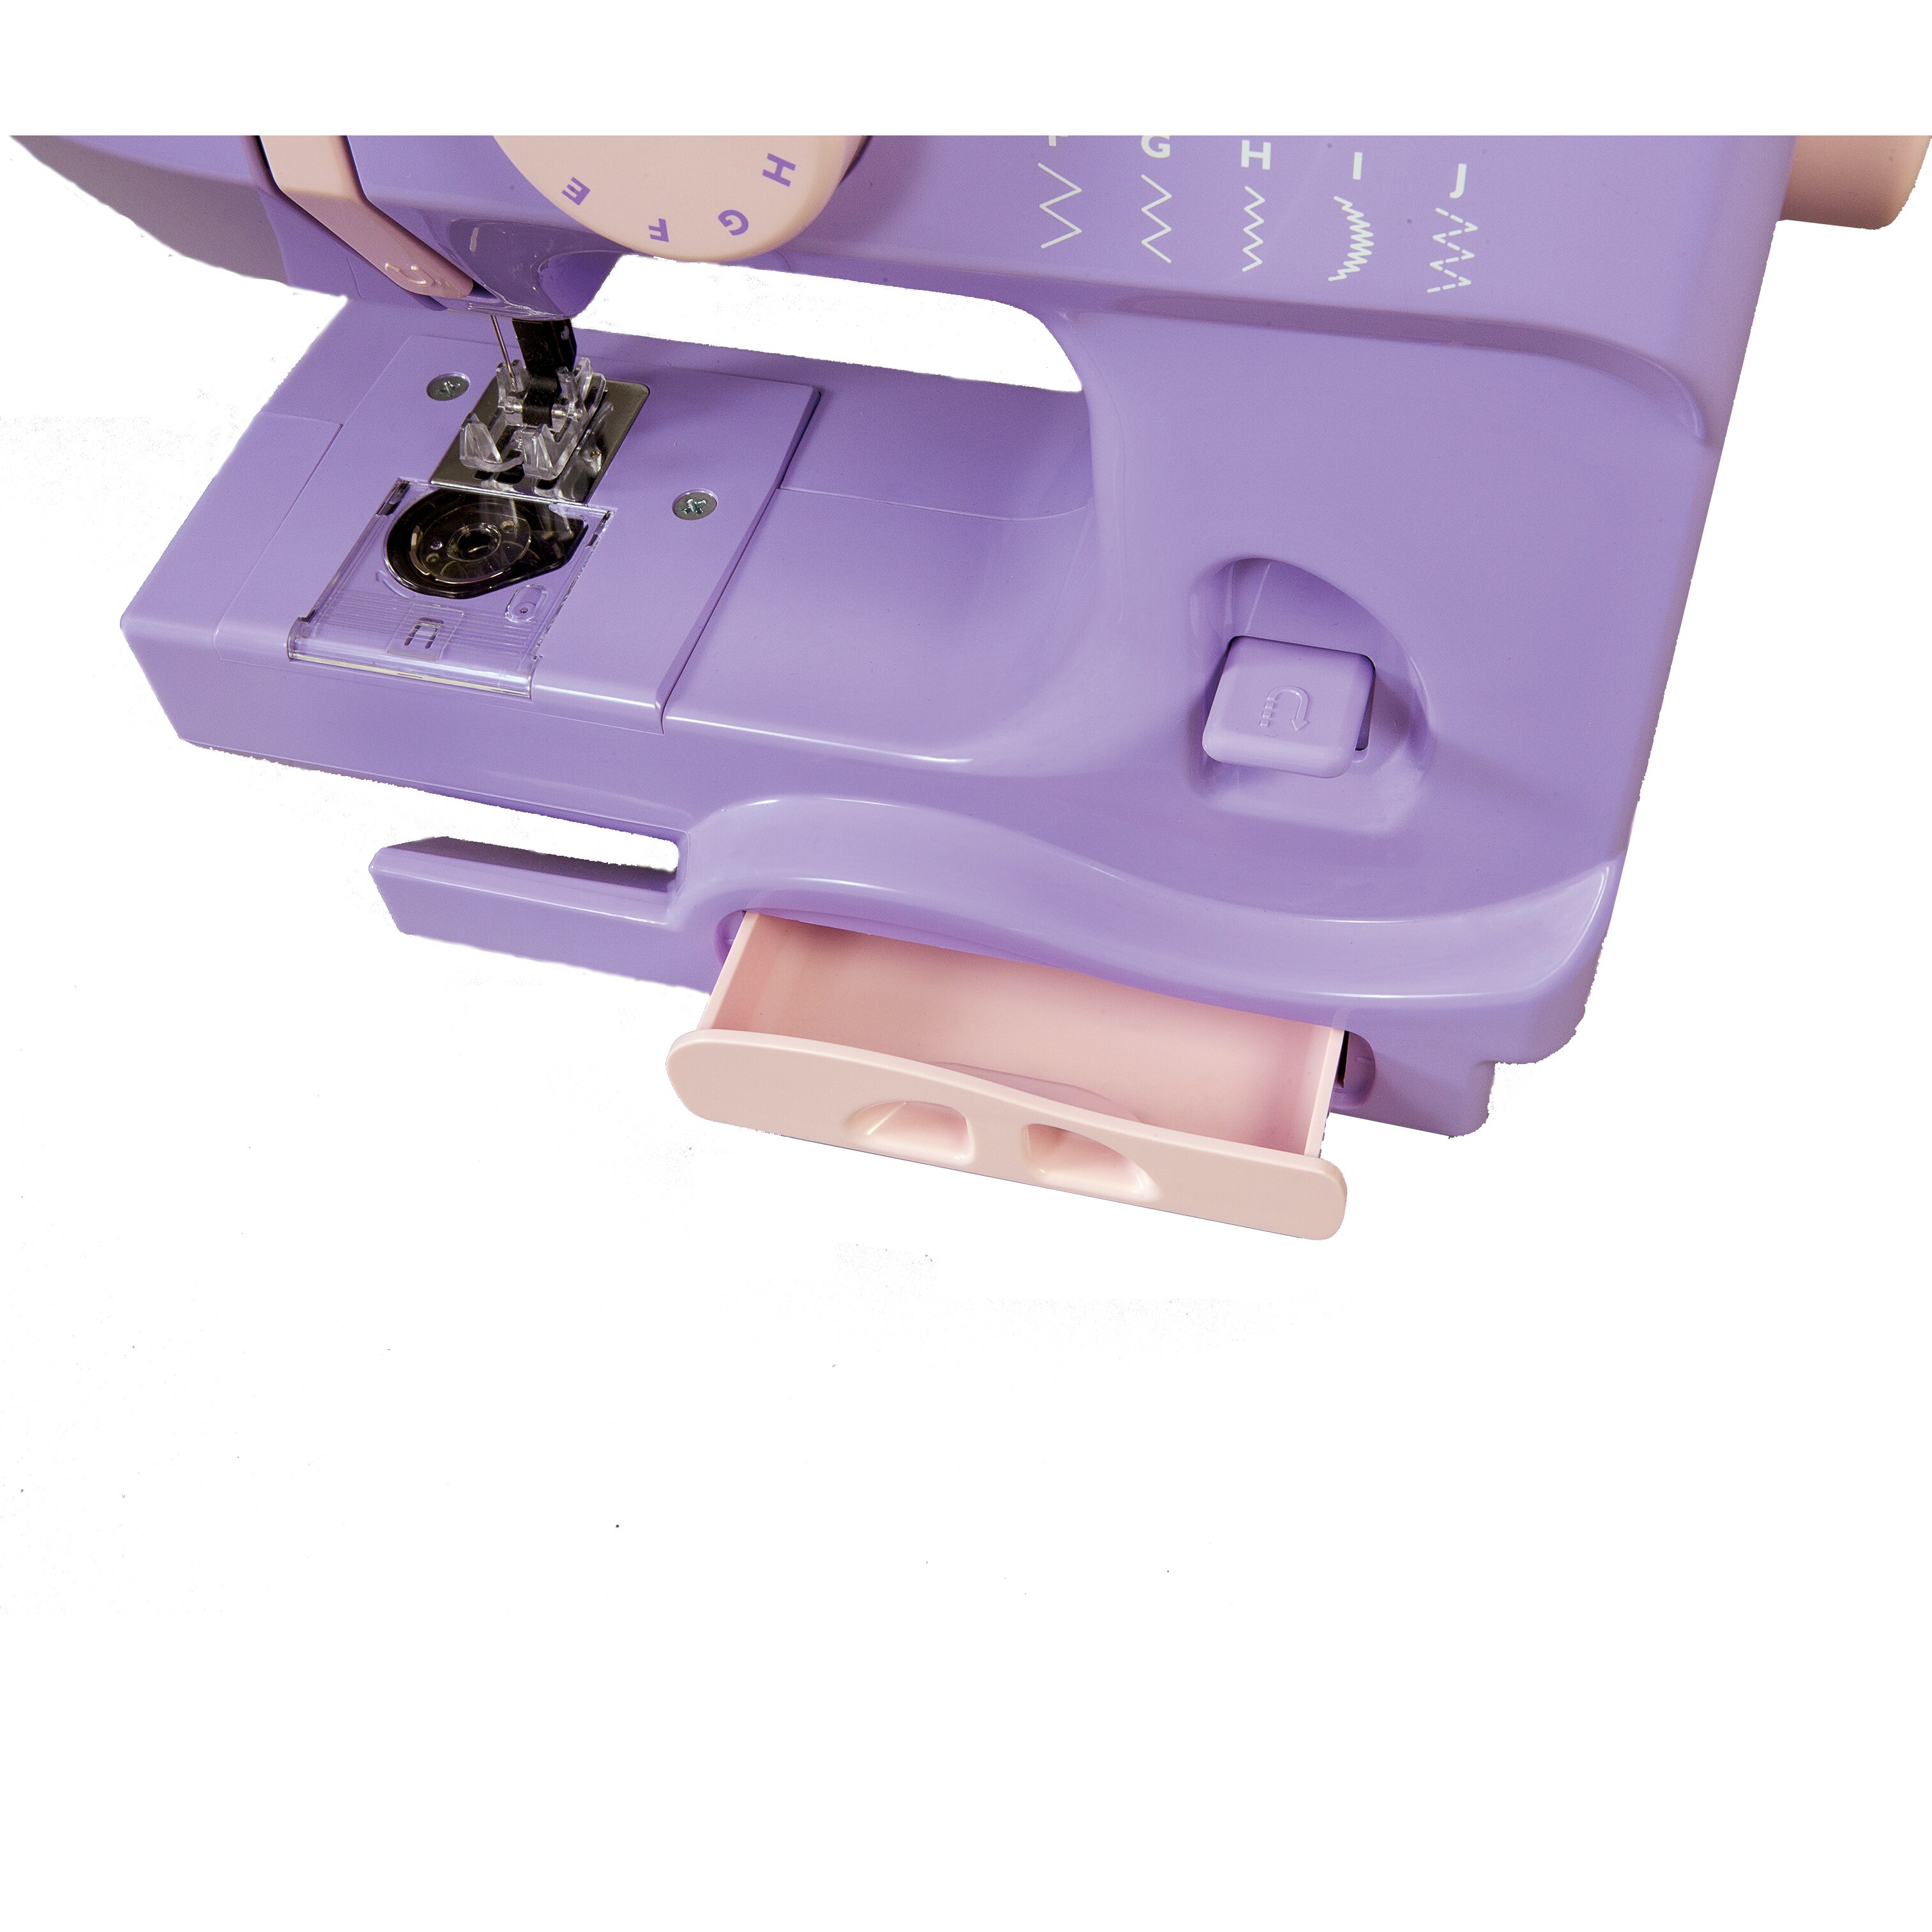 Janome Purple Majesty Easy-to-Use Sewing Machine 001MAJESTY - The Home Depot